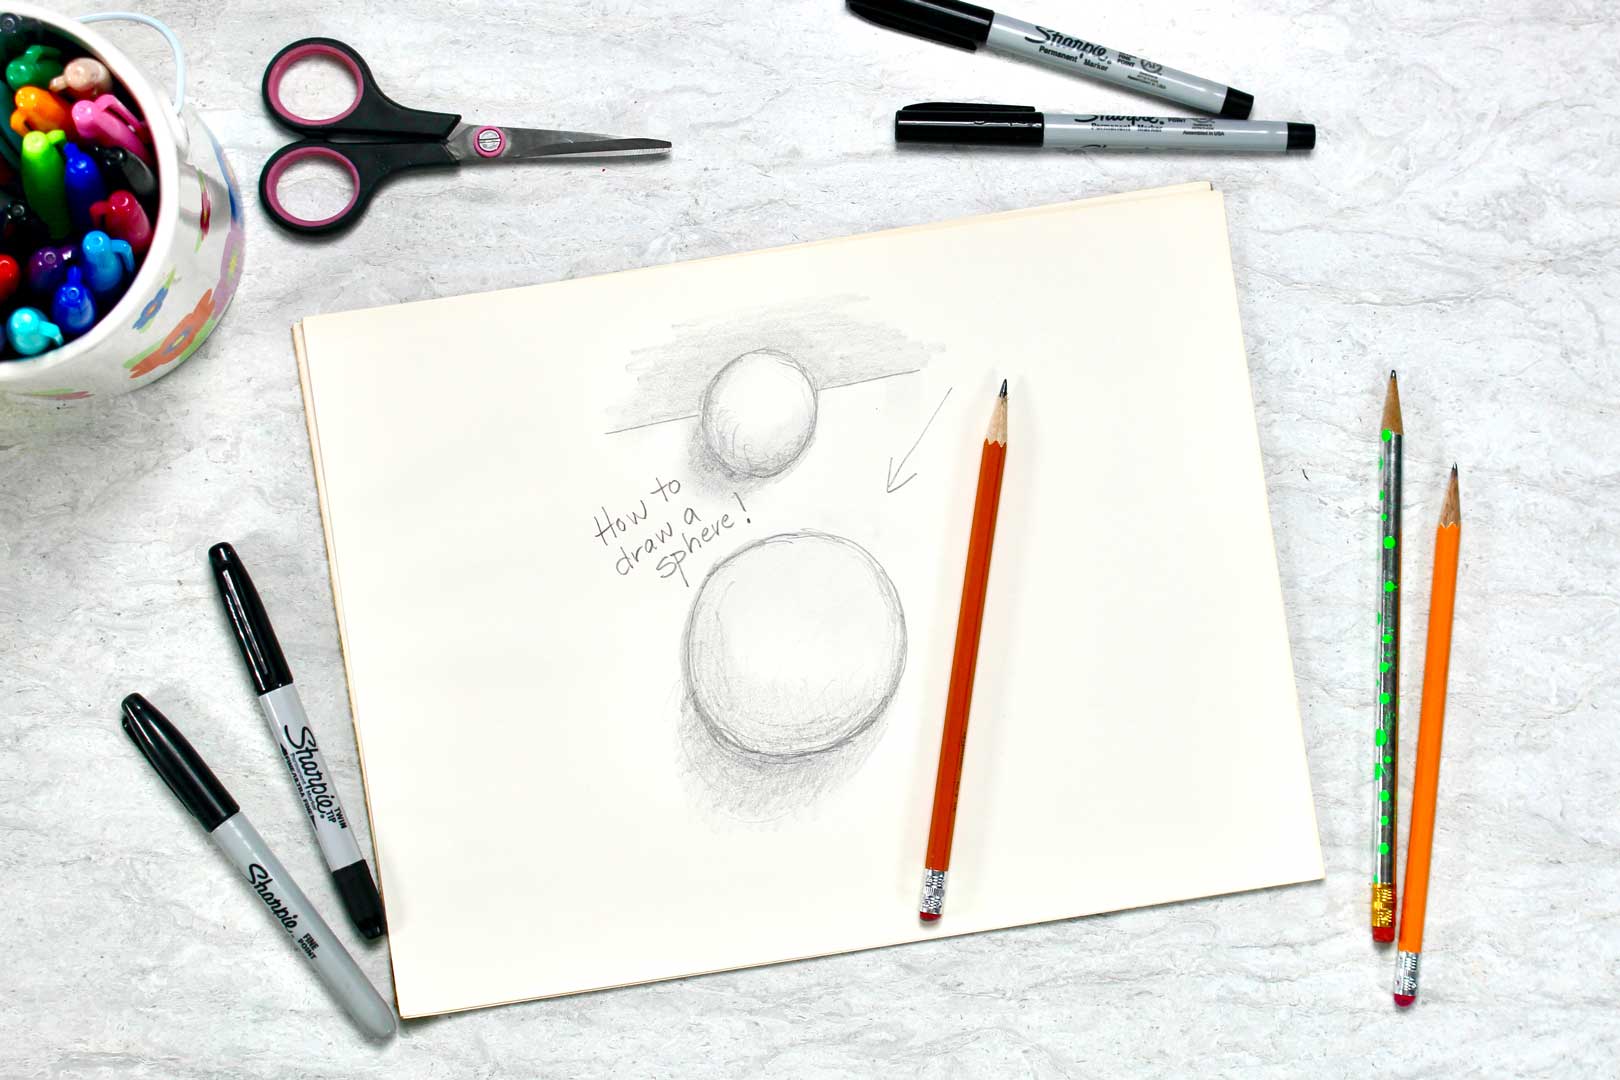 A tutorial pencil drawing of two 3-D spheres, sitting near a pencil, a scissors, and and jar of drawing utensils.